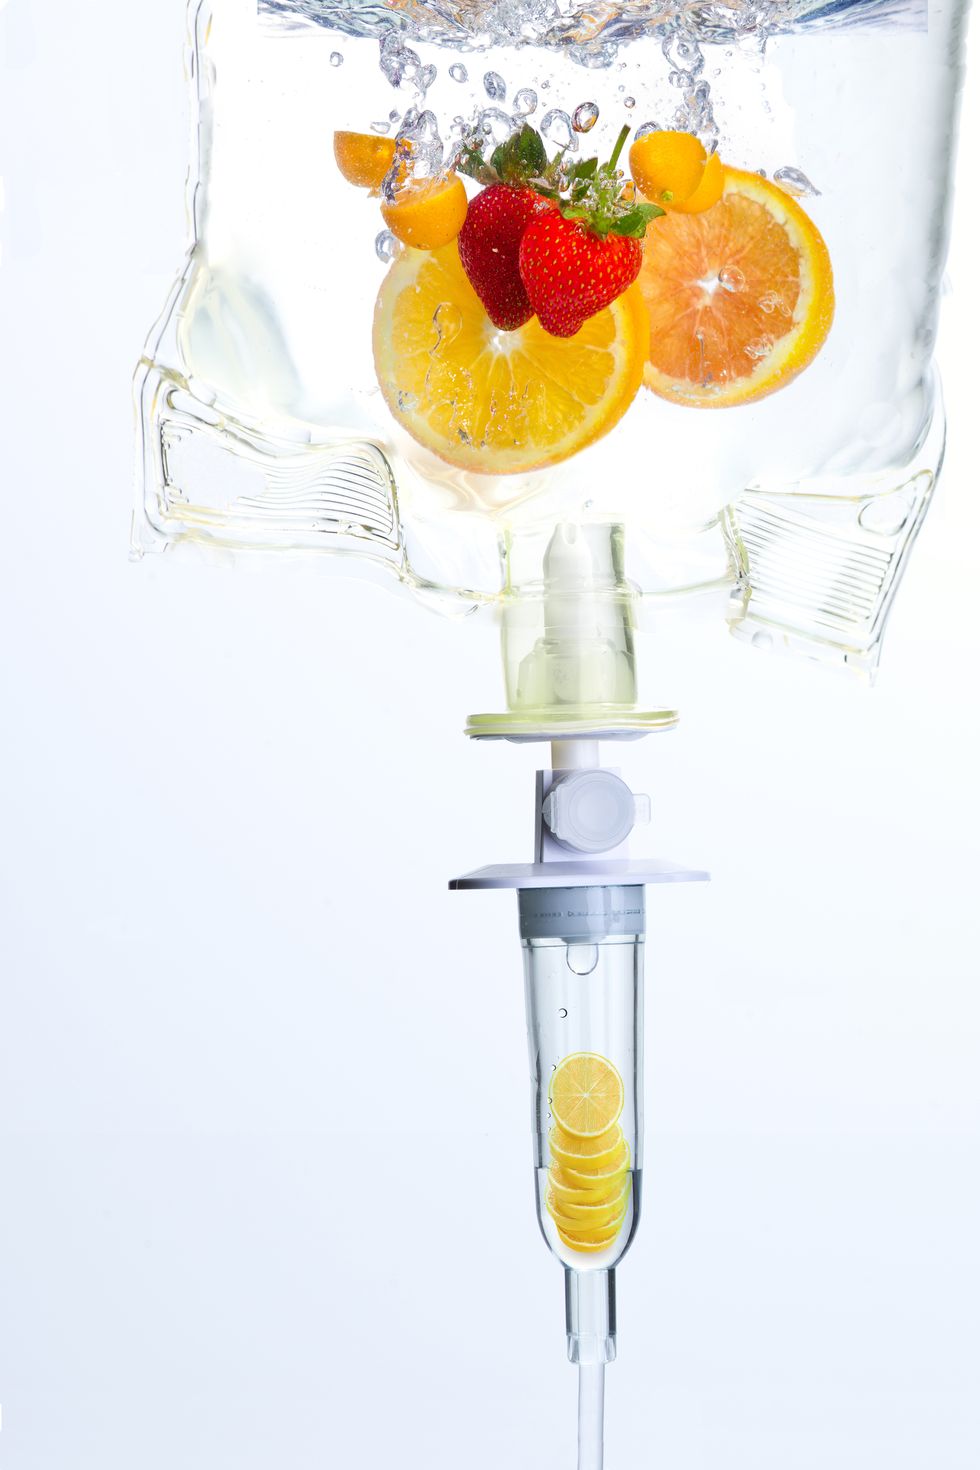 <p>Reboot your body for summer at the new Elixir Clinic, where you can choose from a wide selection of bespoke vitamin infusions. The friendly and professional team help you choose your VitaDrip – whether you want hydration, radiance or anti-ageing. There are also options for post-party, diet, detox and jet lag, containing minerals and nutrients to help you recover. A visit to the clinic is a relaxing experience, after which you'll have a wonderful night's sleep, before waking up feeling energised, glowing, and with an undeniable sense of well-being. <em>Visit <a href="http://theelixirclinic.com">theelixirclinic.com</a>.</em></p><p><em>Image courtesy of the Elixir Clinic</em></p>